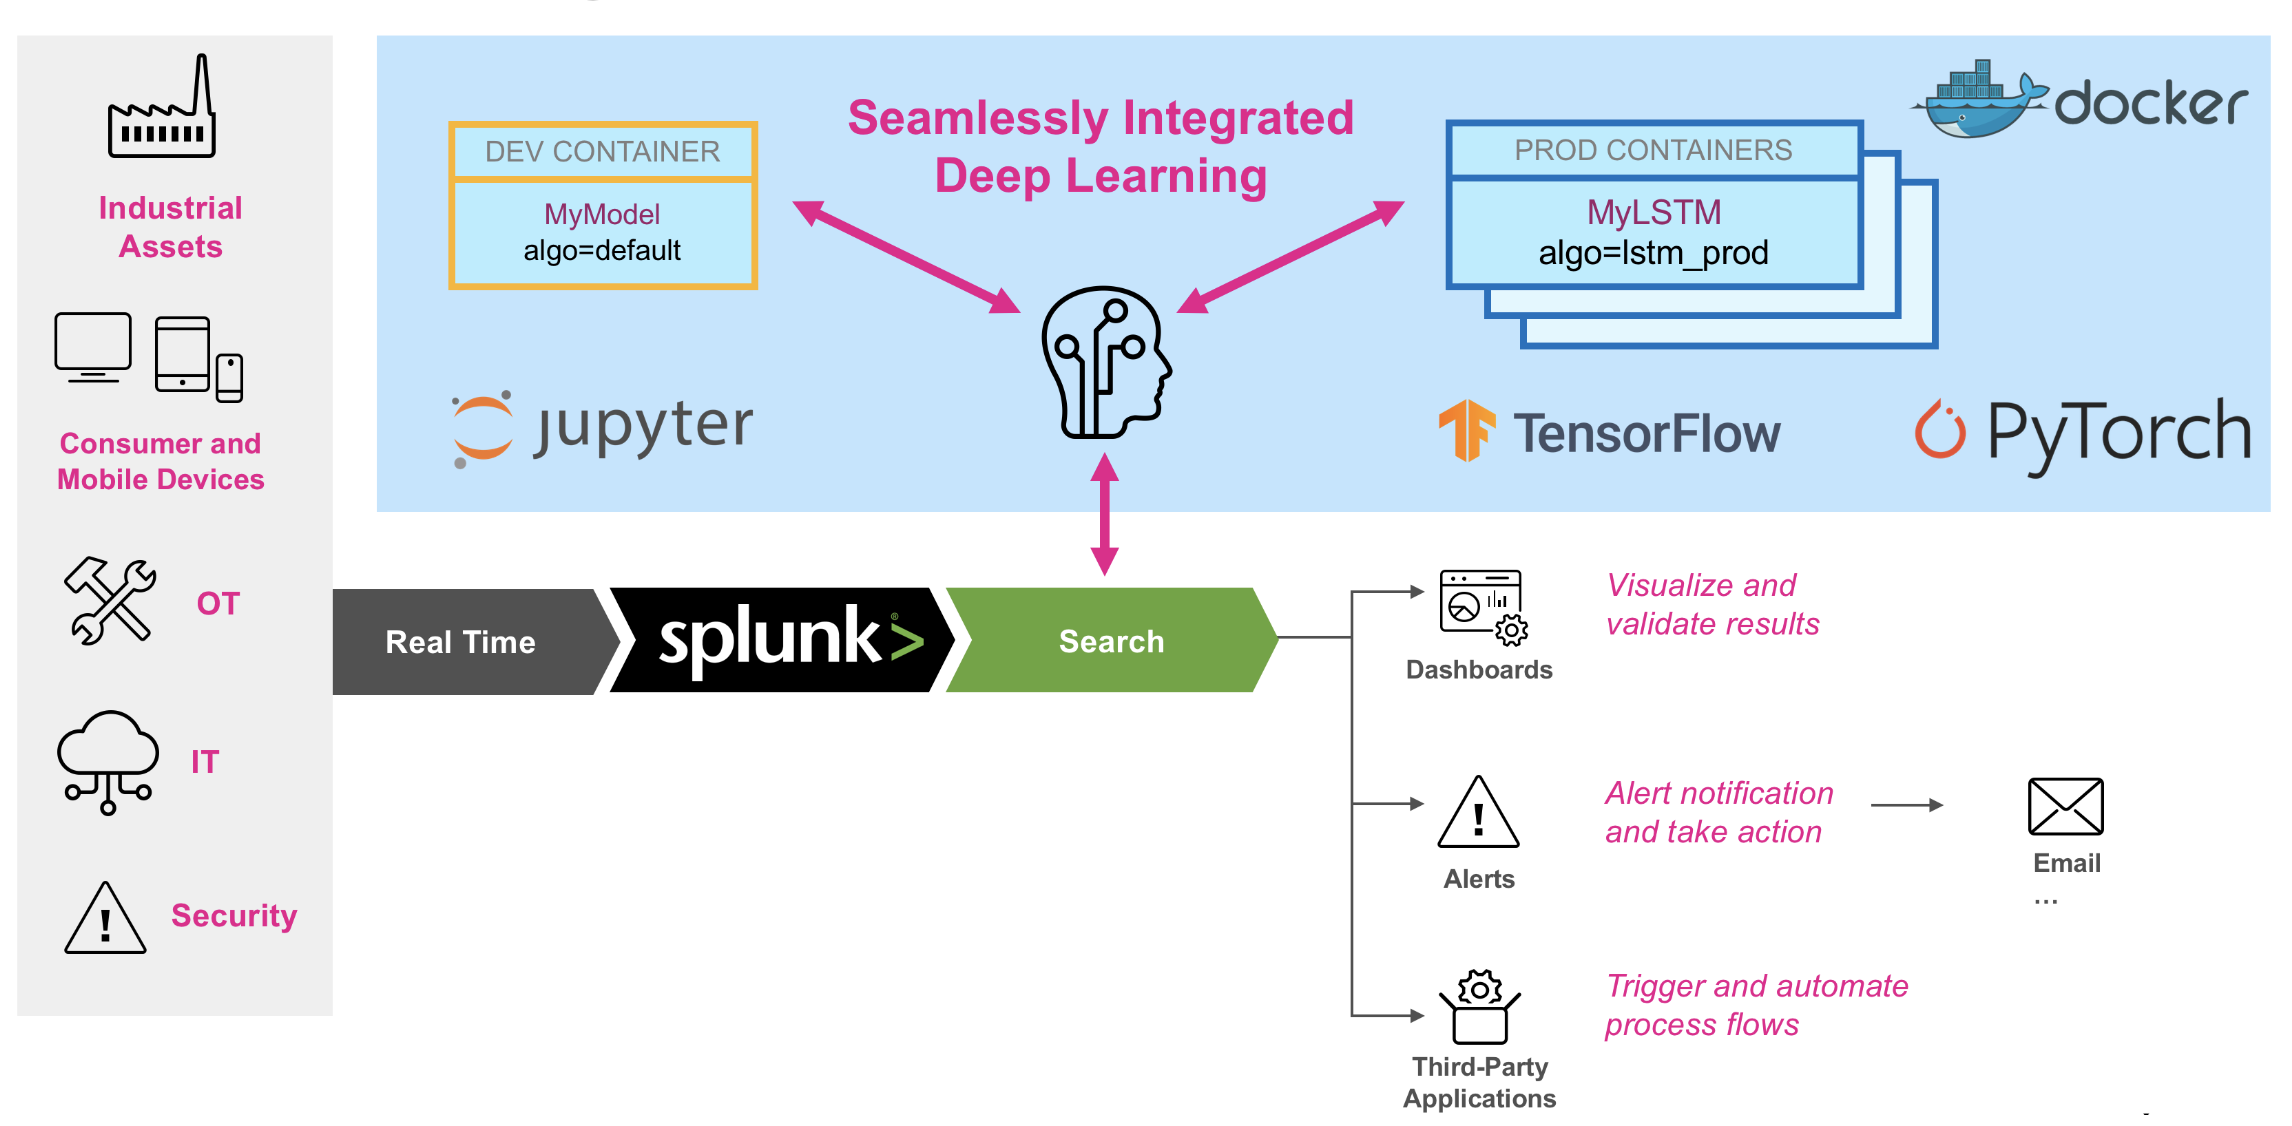 This image illustrates where the app fits into a machine learning workflow using the Splunk platform. On the far left of the image there are graphics representing different business use case types including IoT, IT, and Security. The middle of the image represents DSDL, illustrating how you can leverage Jupyter, TensorFlow, or PyTorch to build models in DSDL. The right of the image shows Splunk platform operational options including validating results and getting alerts.